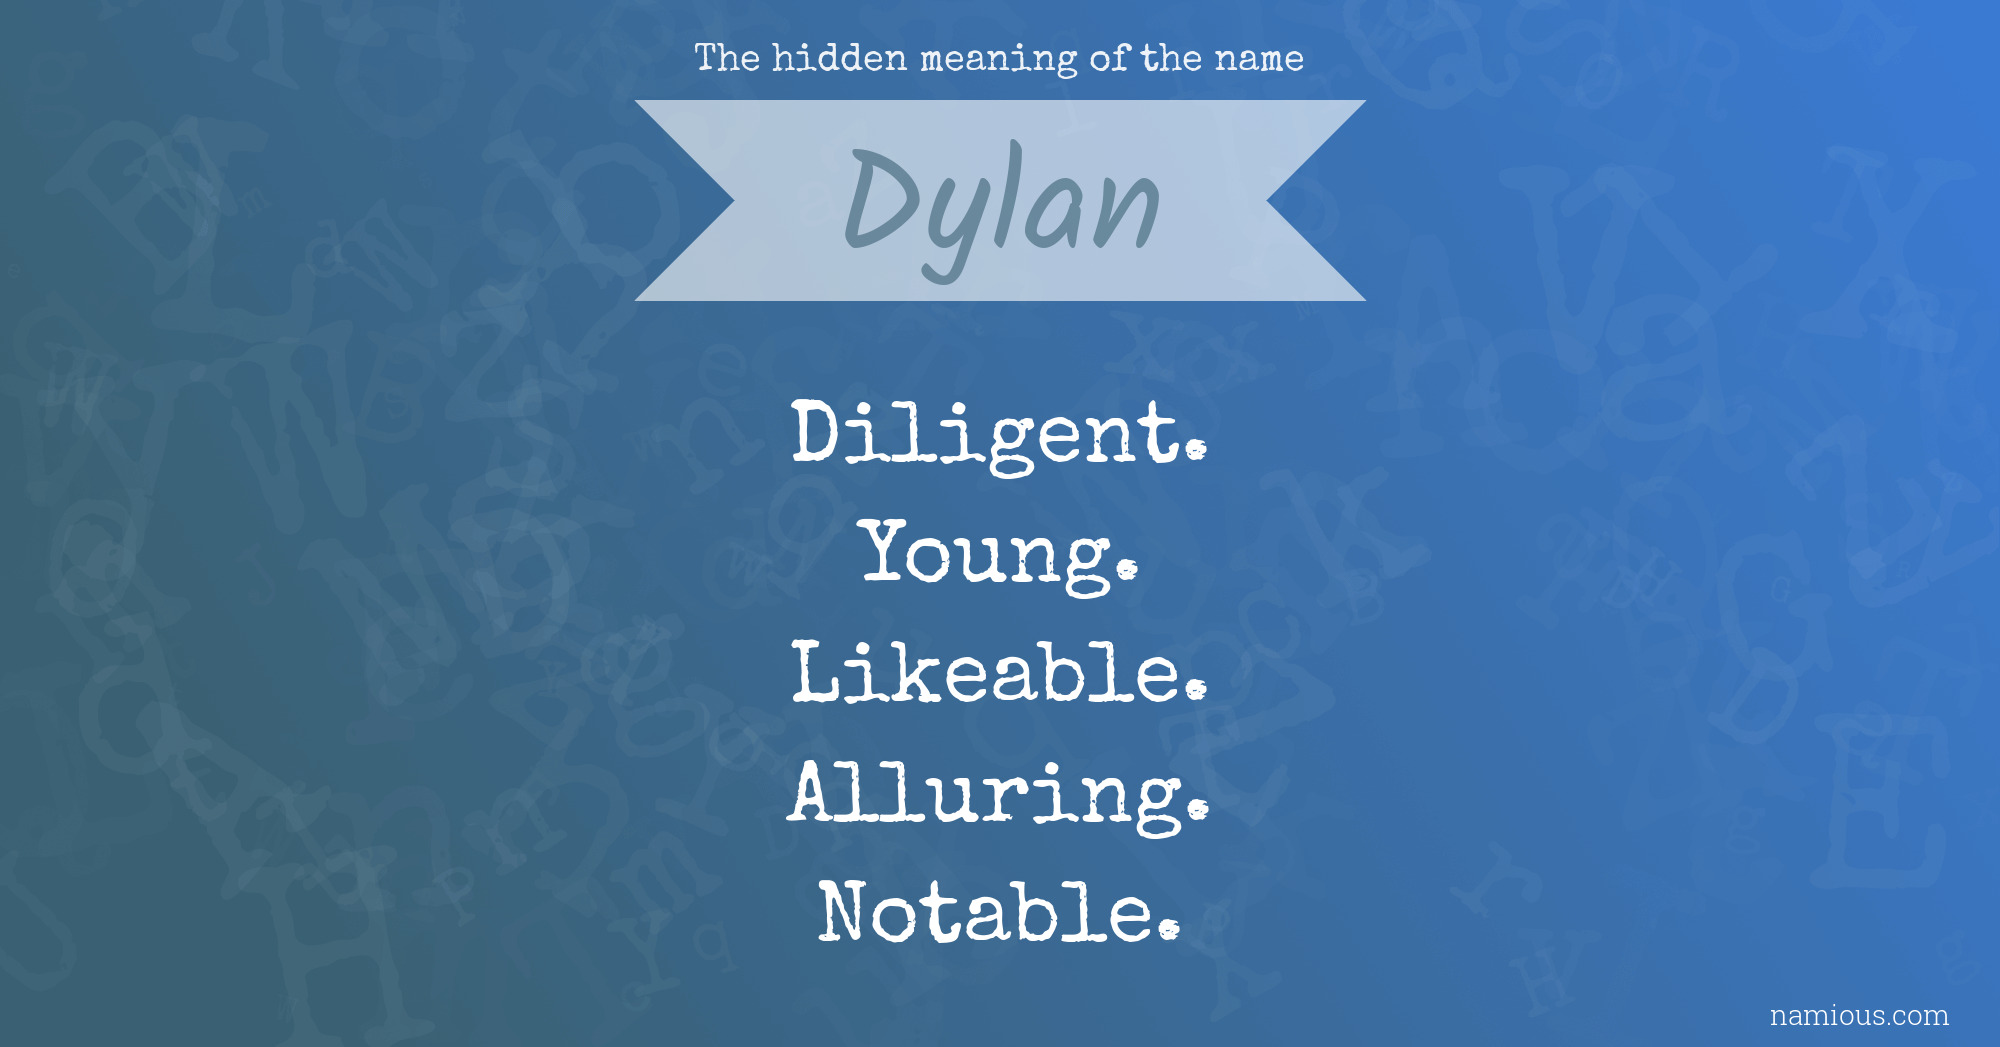 The hidden meaning of the name Dylan